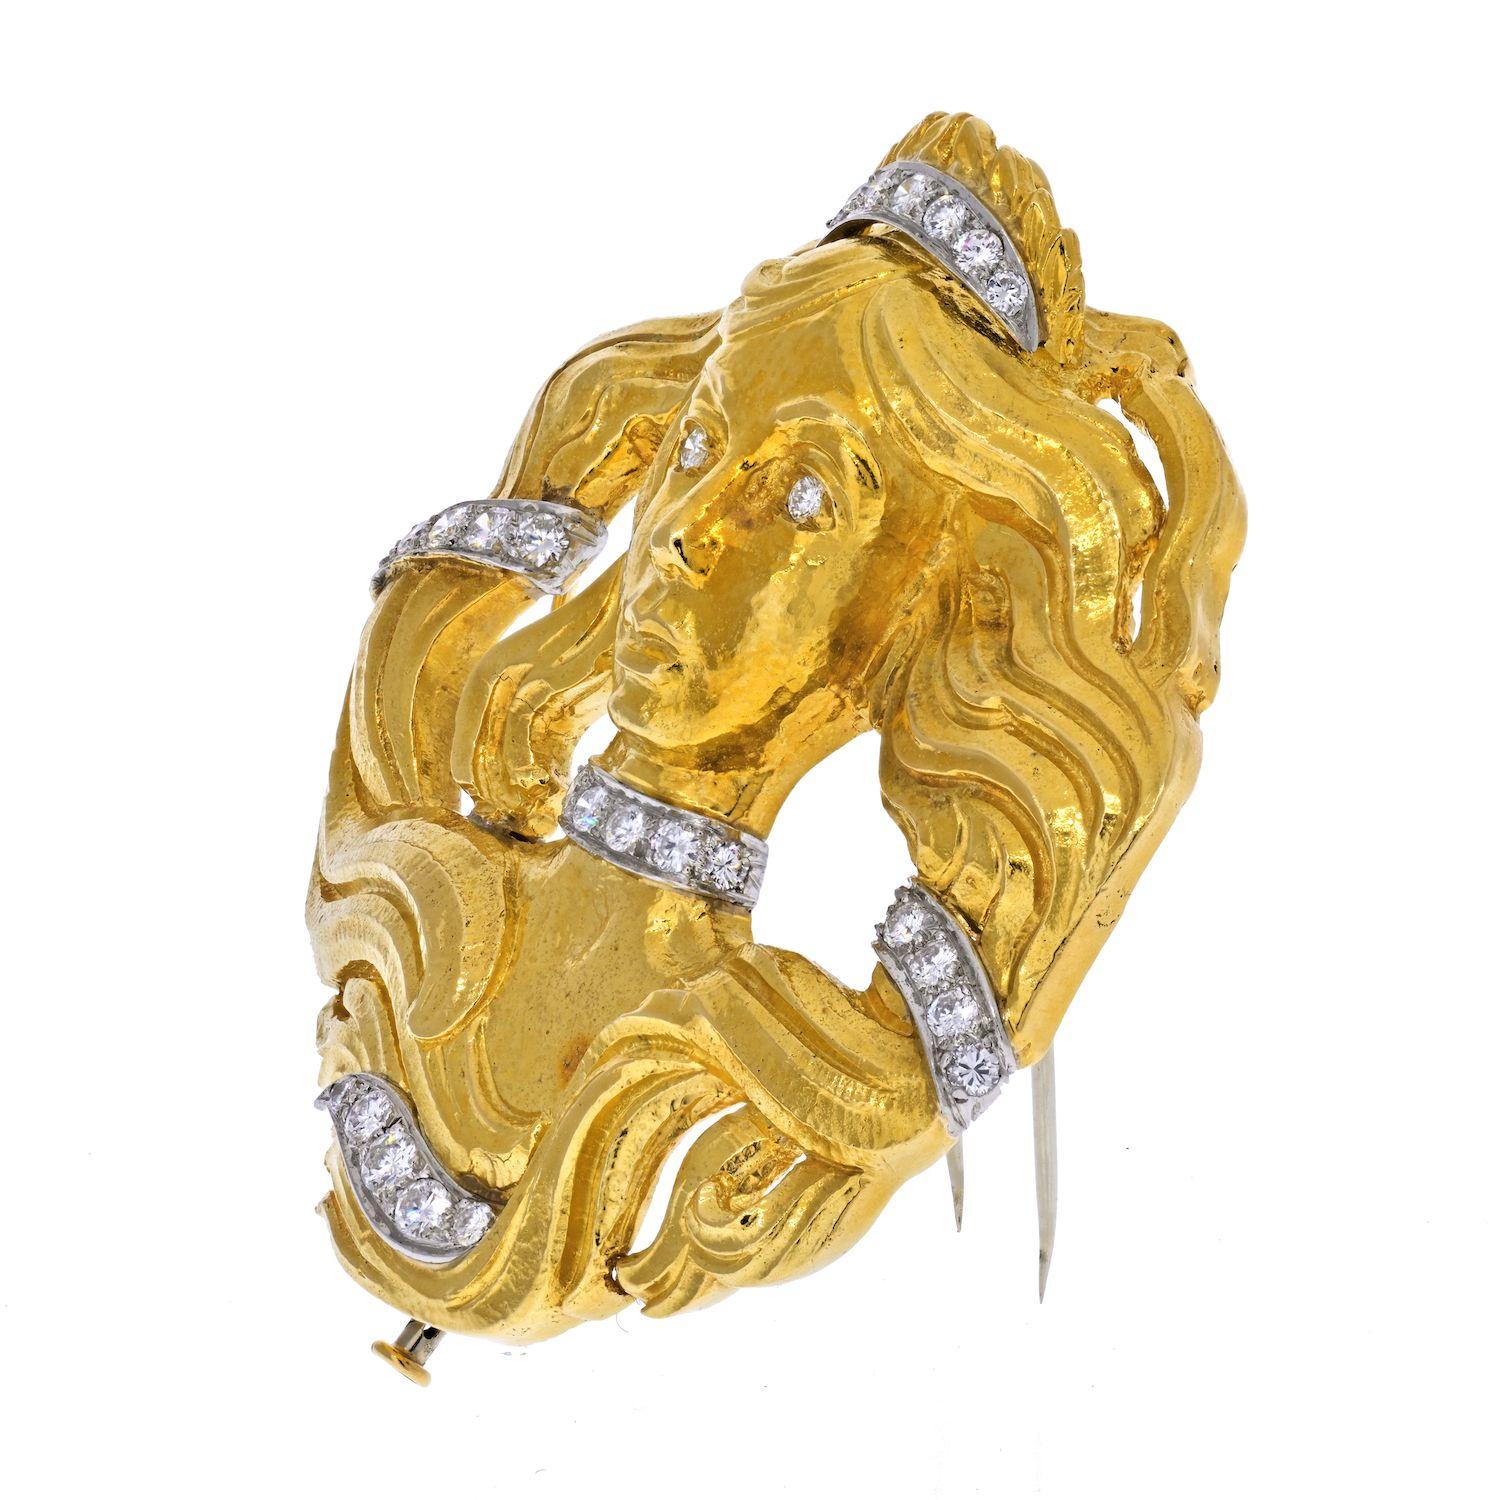 David Webb 18K Yellow Gold Medusa Diamond Pendant Brooch.
Vintage 18K yellow gold platinum and diamond pendant brooch by David Webb. 
Approximate Measurements: 
Length: 2.4 inches
Width: 2.2 inches
Double pin closure. 
